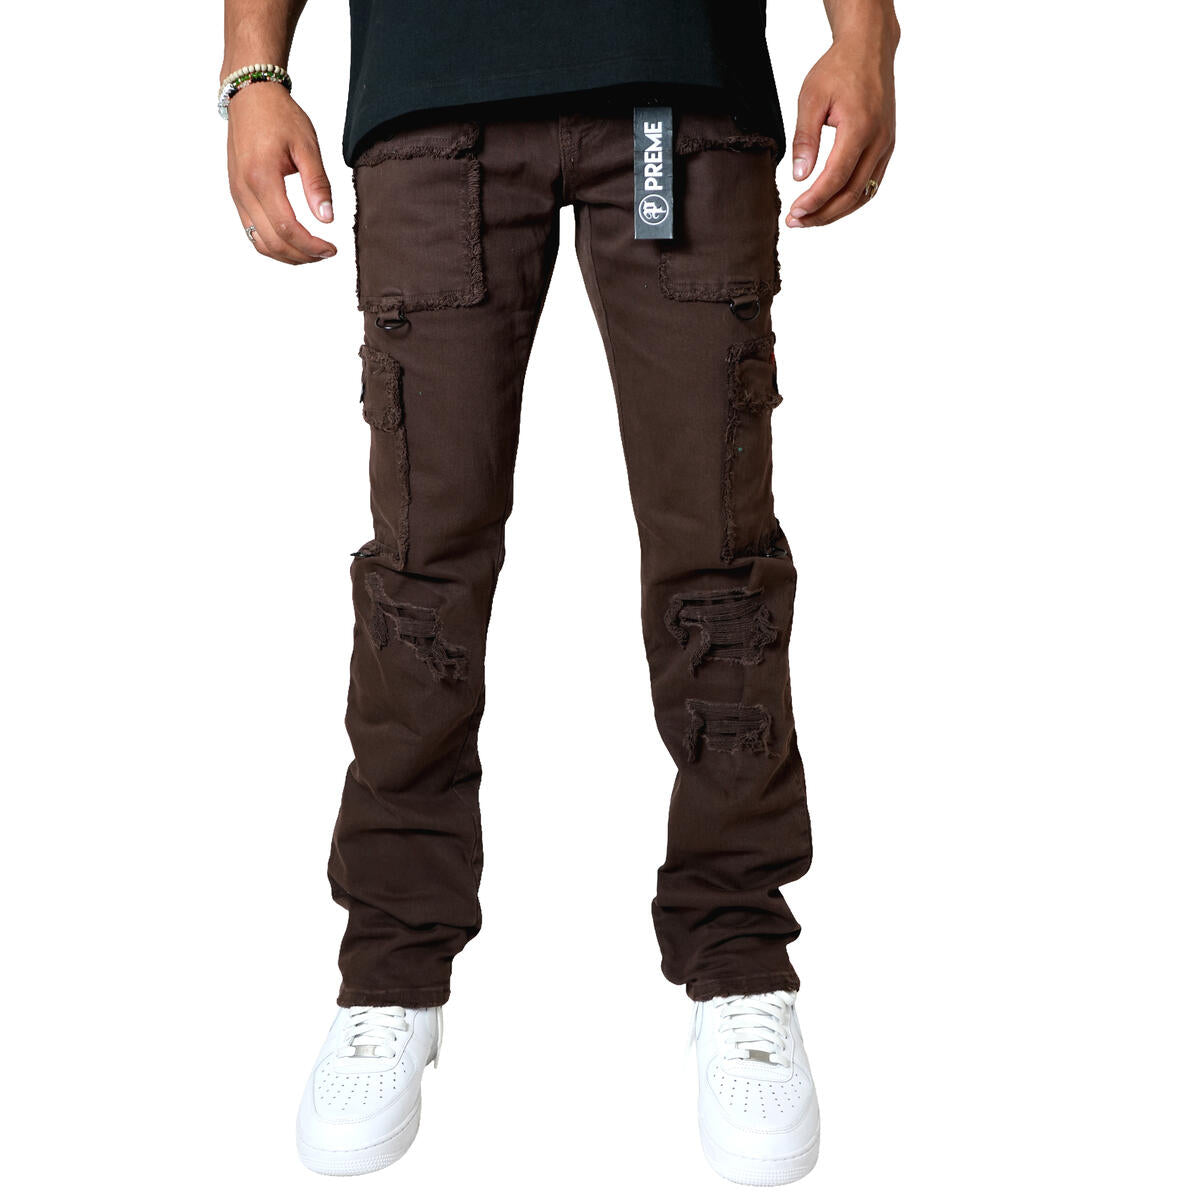 The Nomad Stacked Cargo Denim Jeans - Chocolate